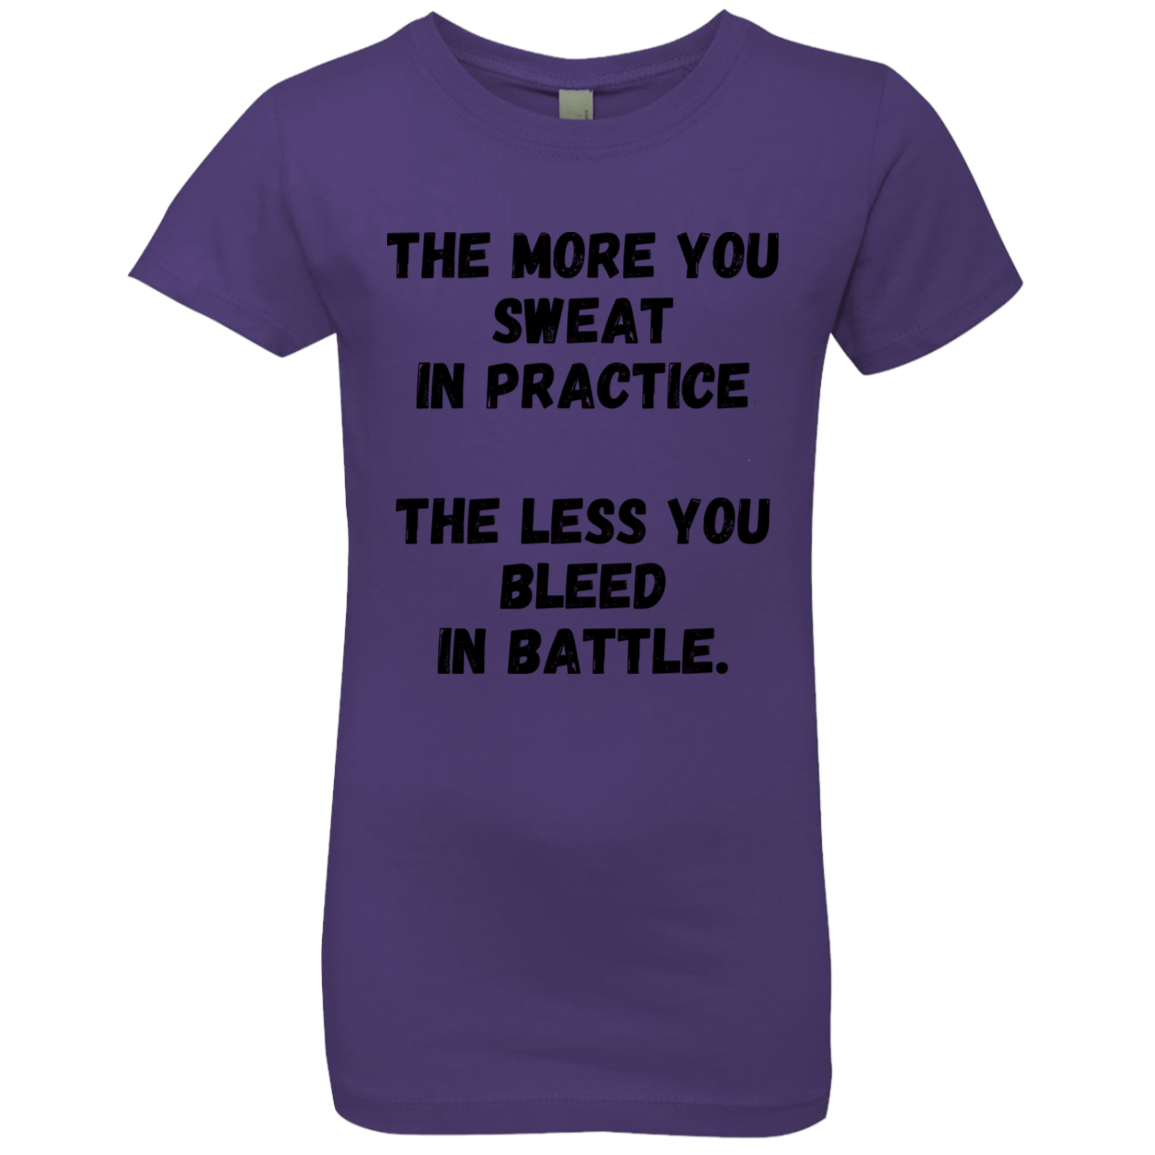 The More You Sweat In Practice, The Less You Bleed In Battle - Girls', Teen, Youth T-Shirt